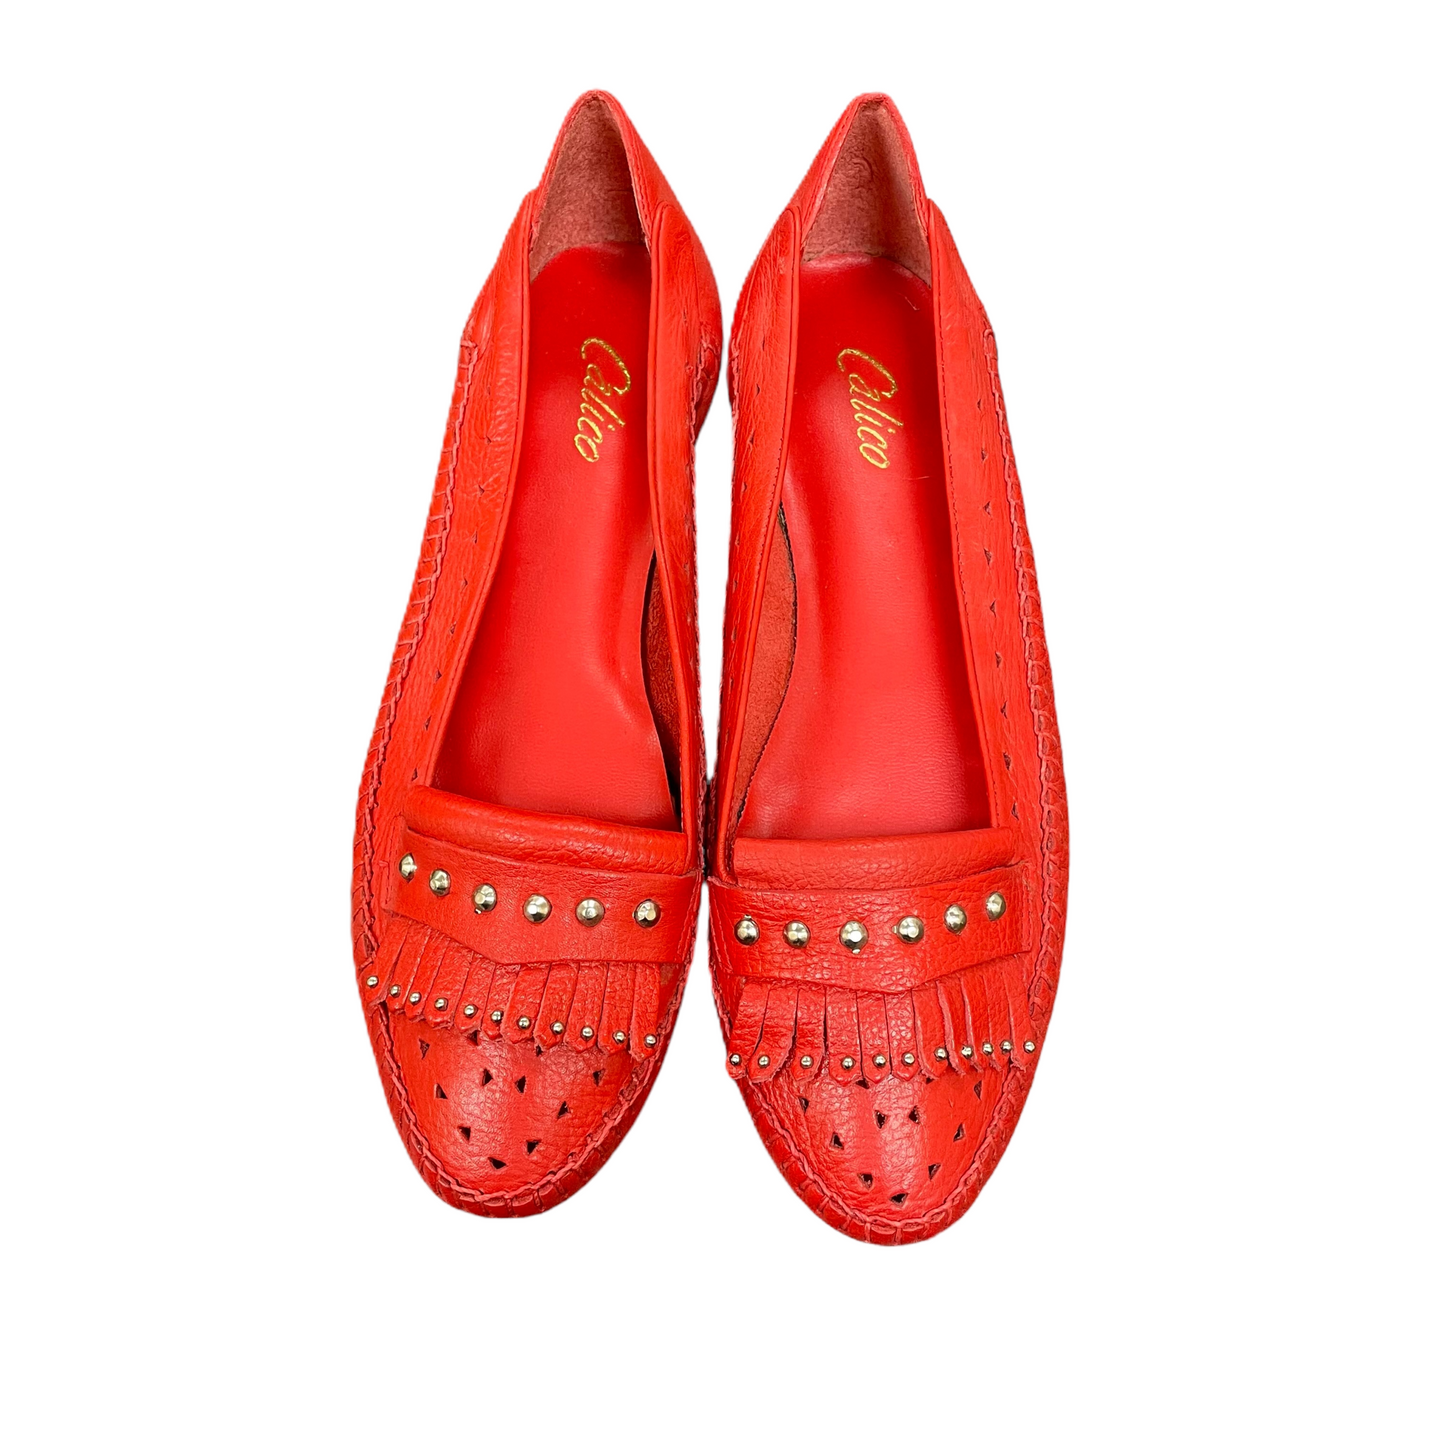 Red Shoes Flats By Calico, Size: 7.5